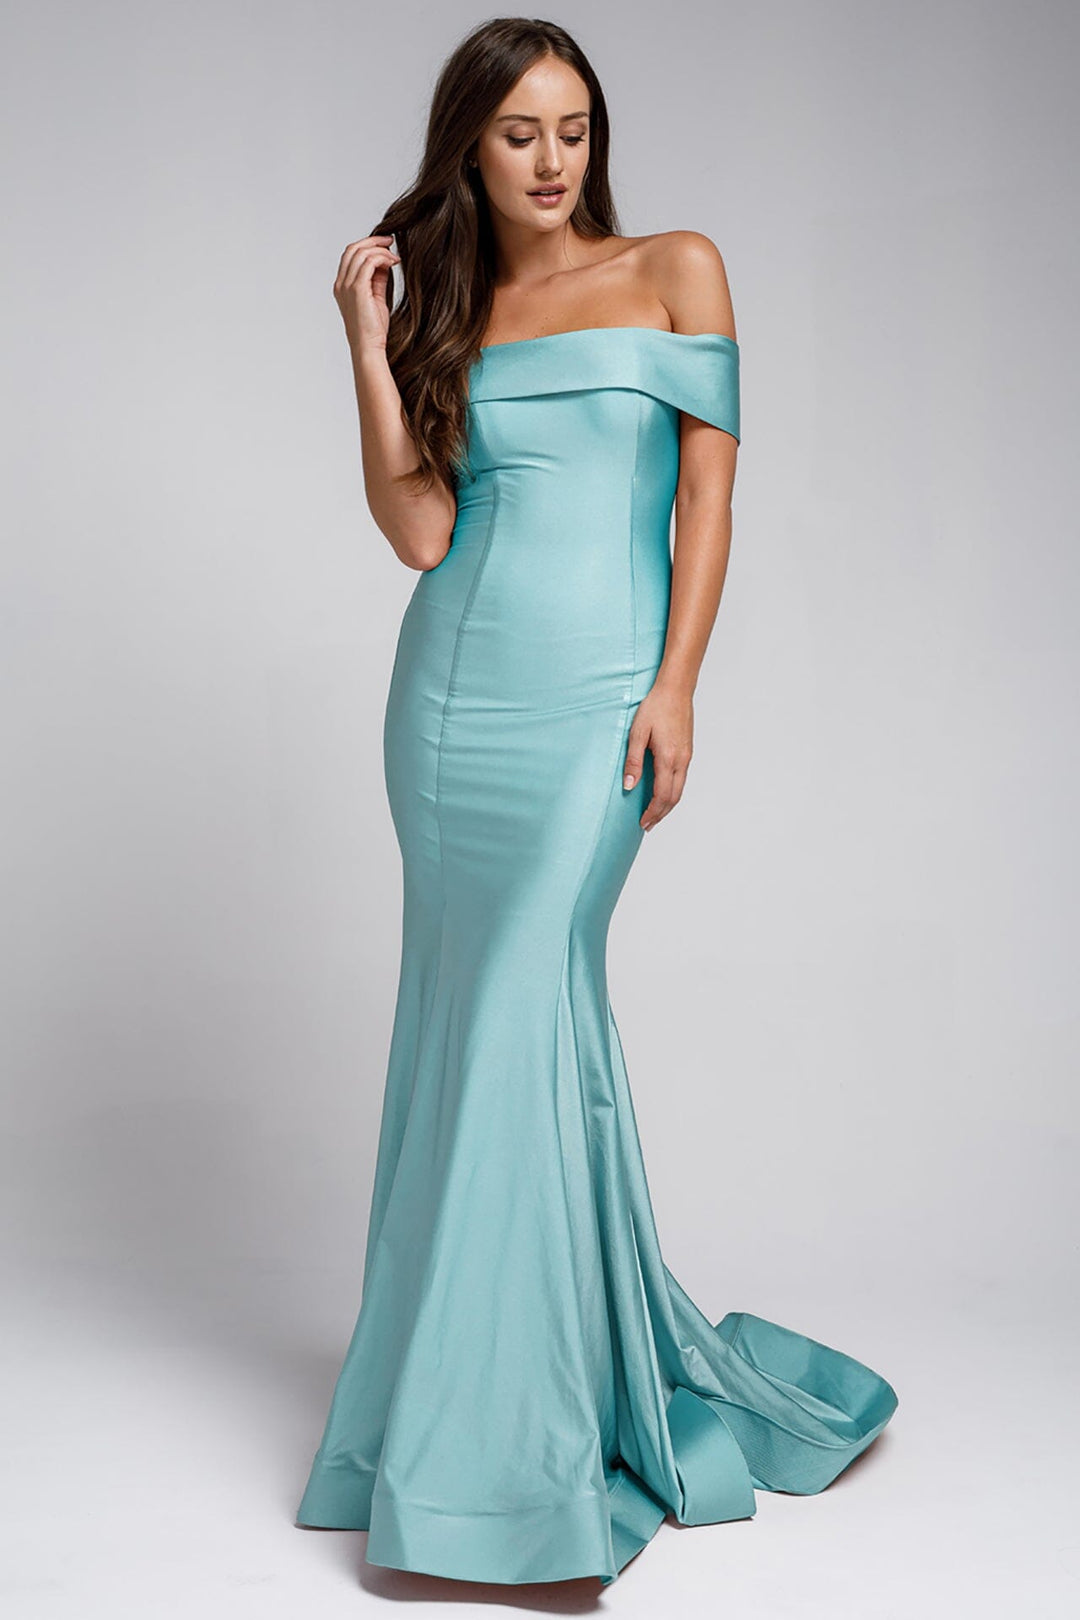 Lycra Off Shoulder Mermaid Dress by Amelia Couture 373